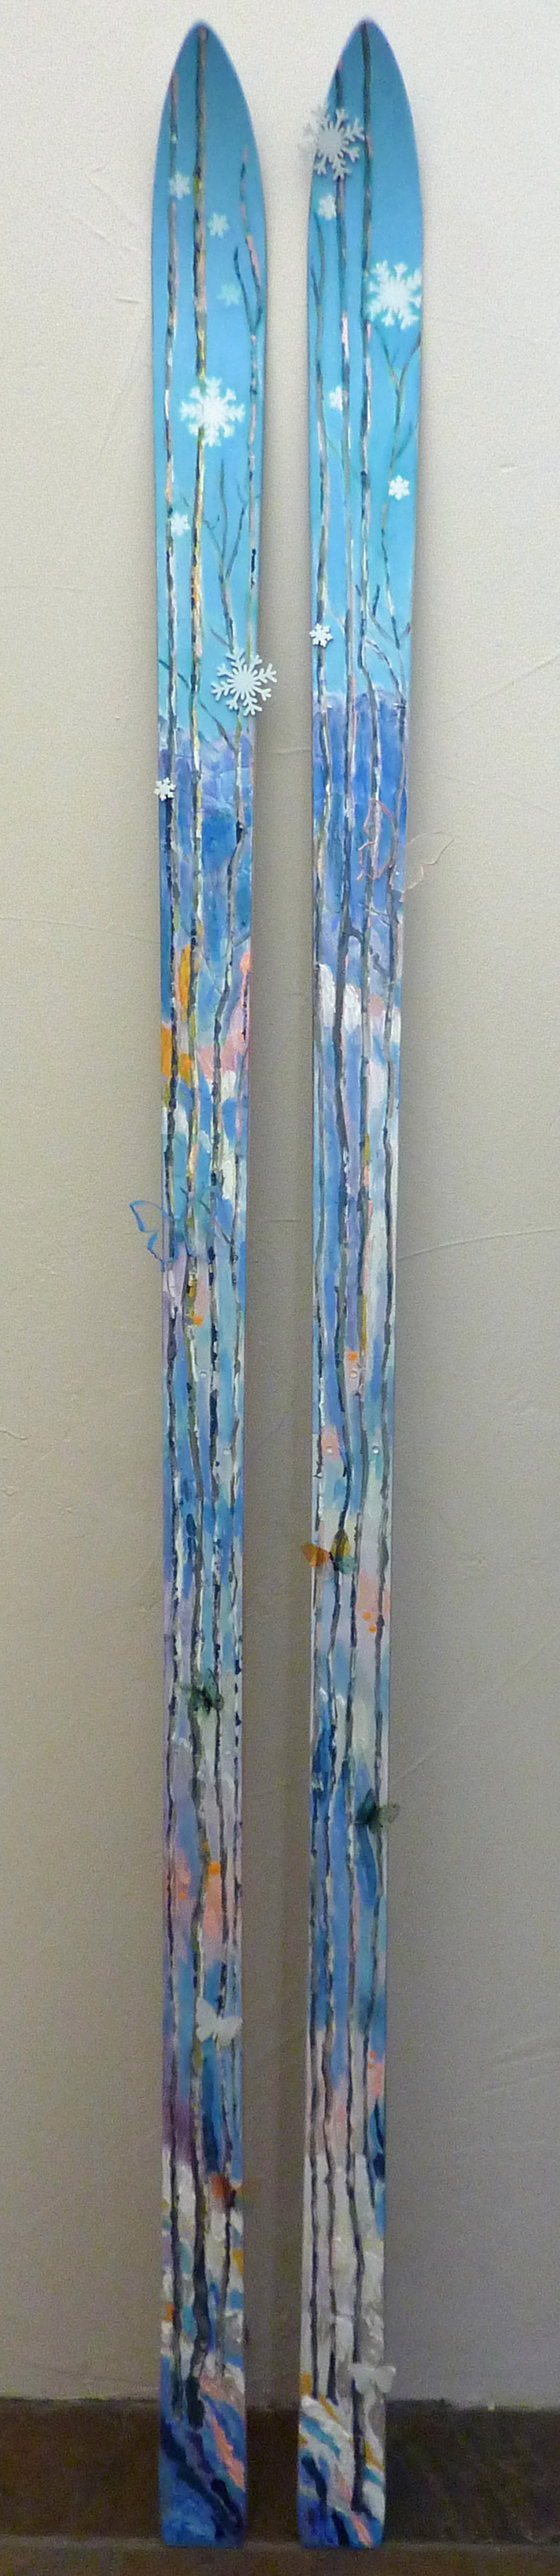 Spring Powder Day (Skis with abstract aspens) by Cindi Underwood